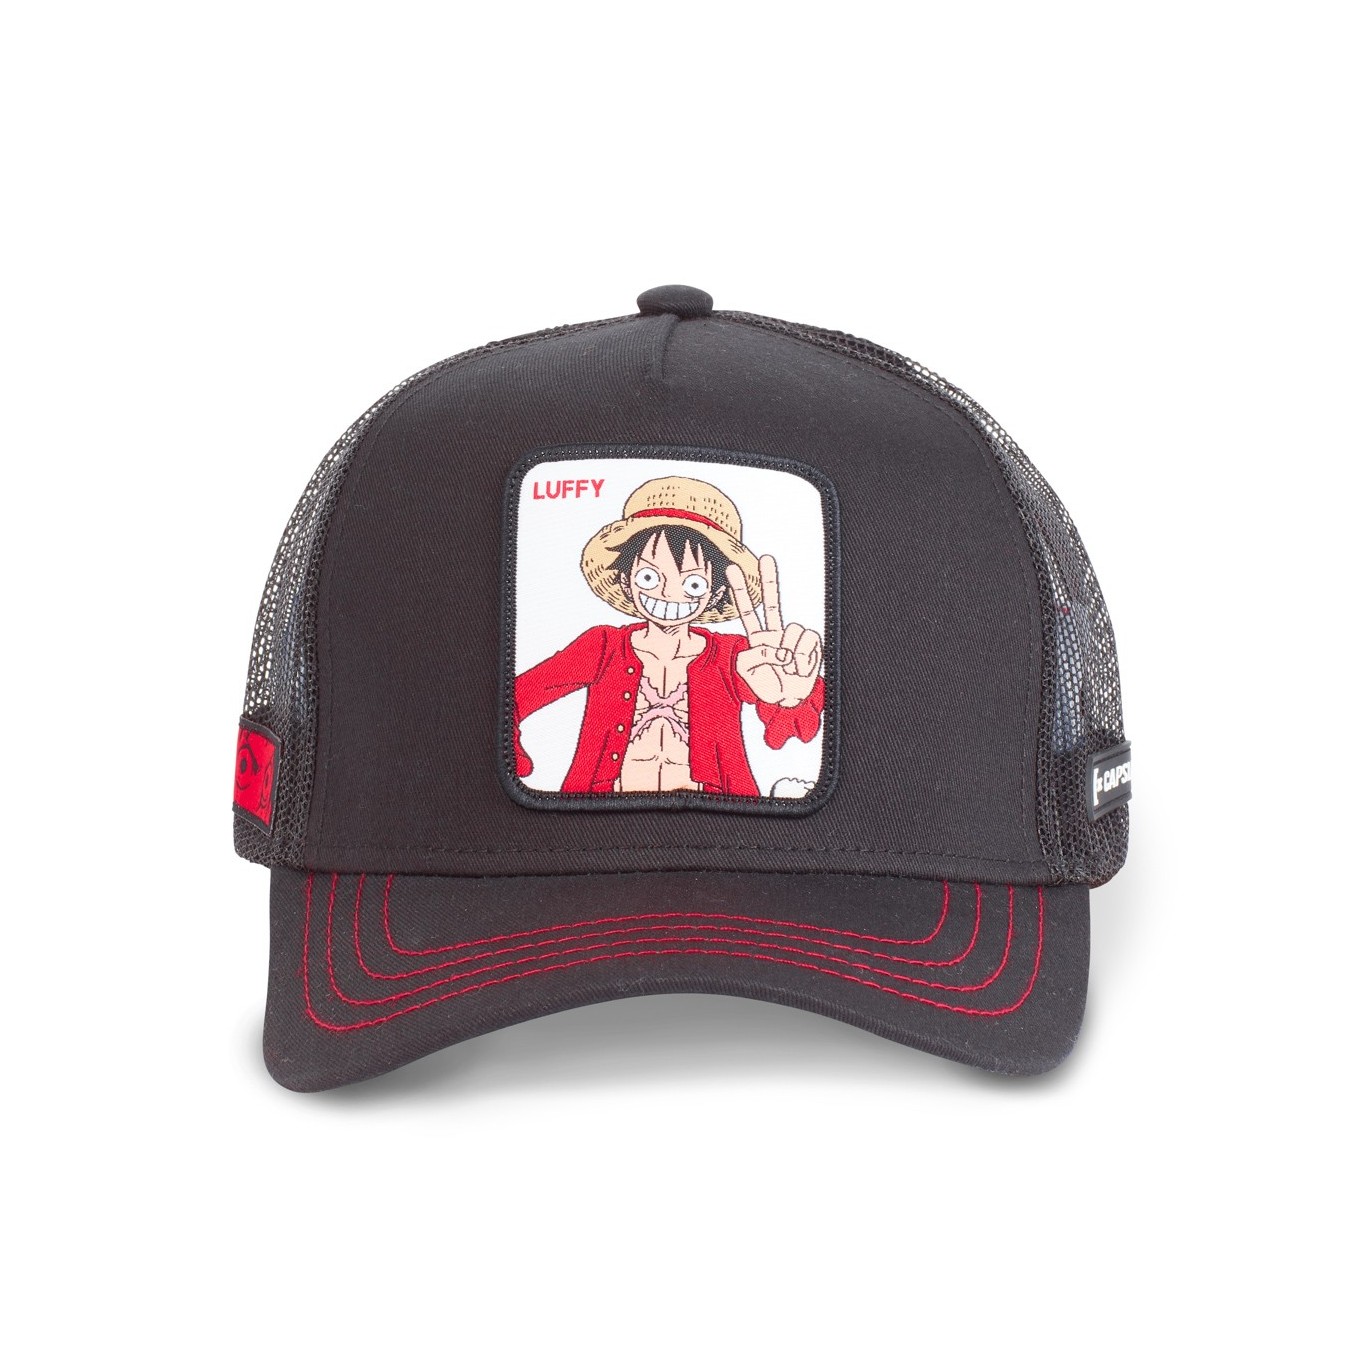 Casquette Capslab adulte One Piece Luffy Capslab - 2